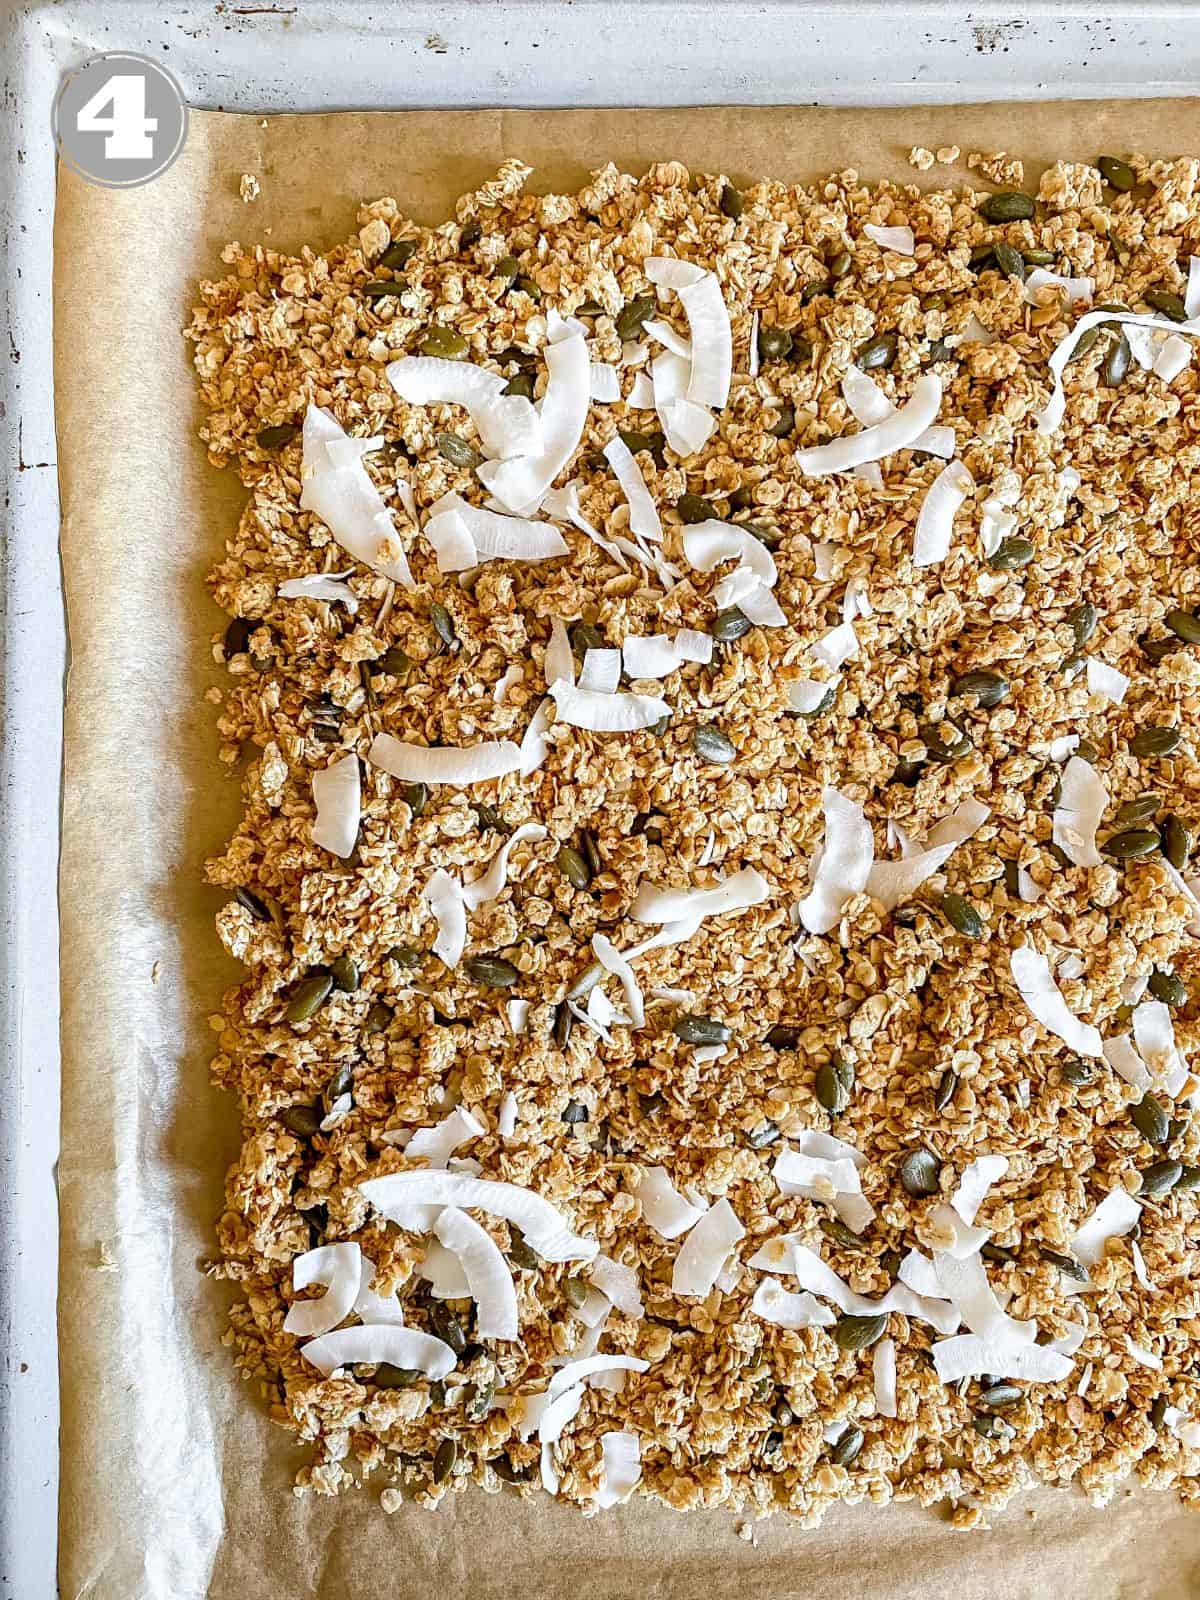 granola with coconut on it on a baking tray.